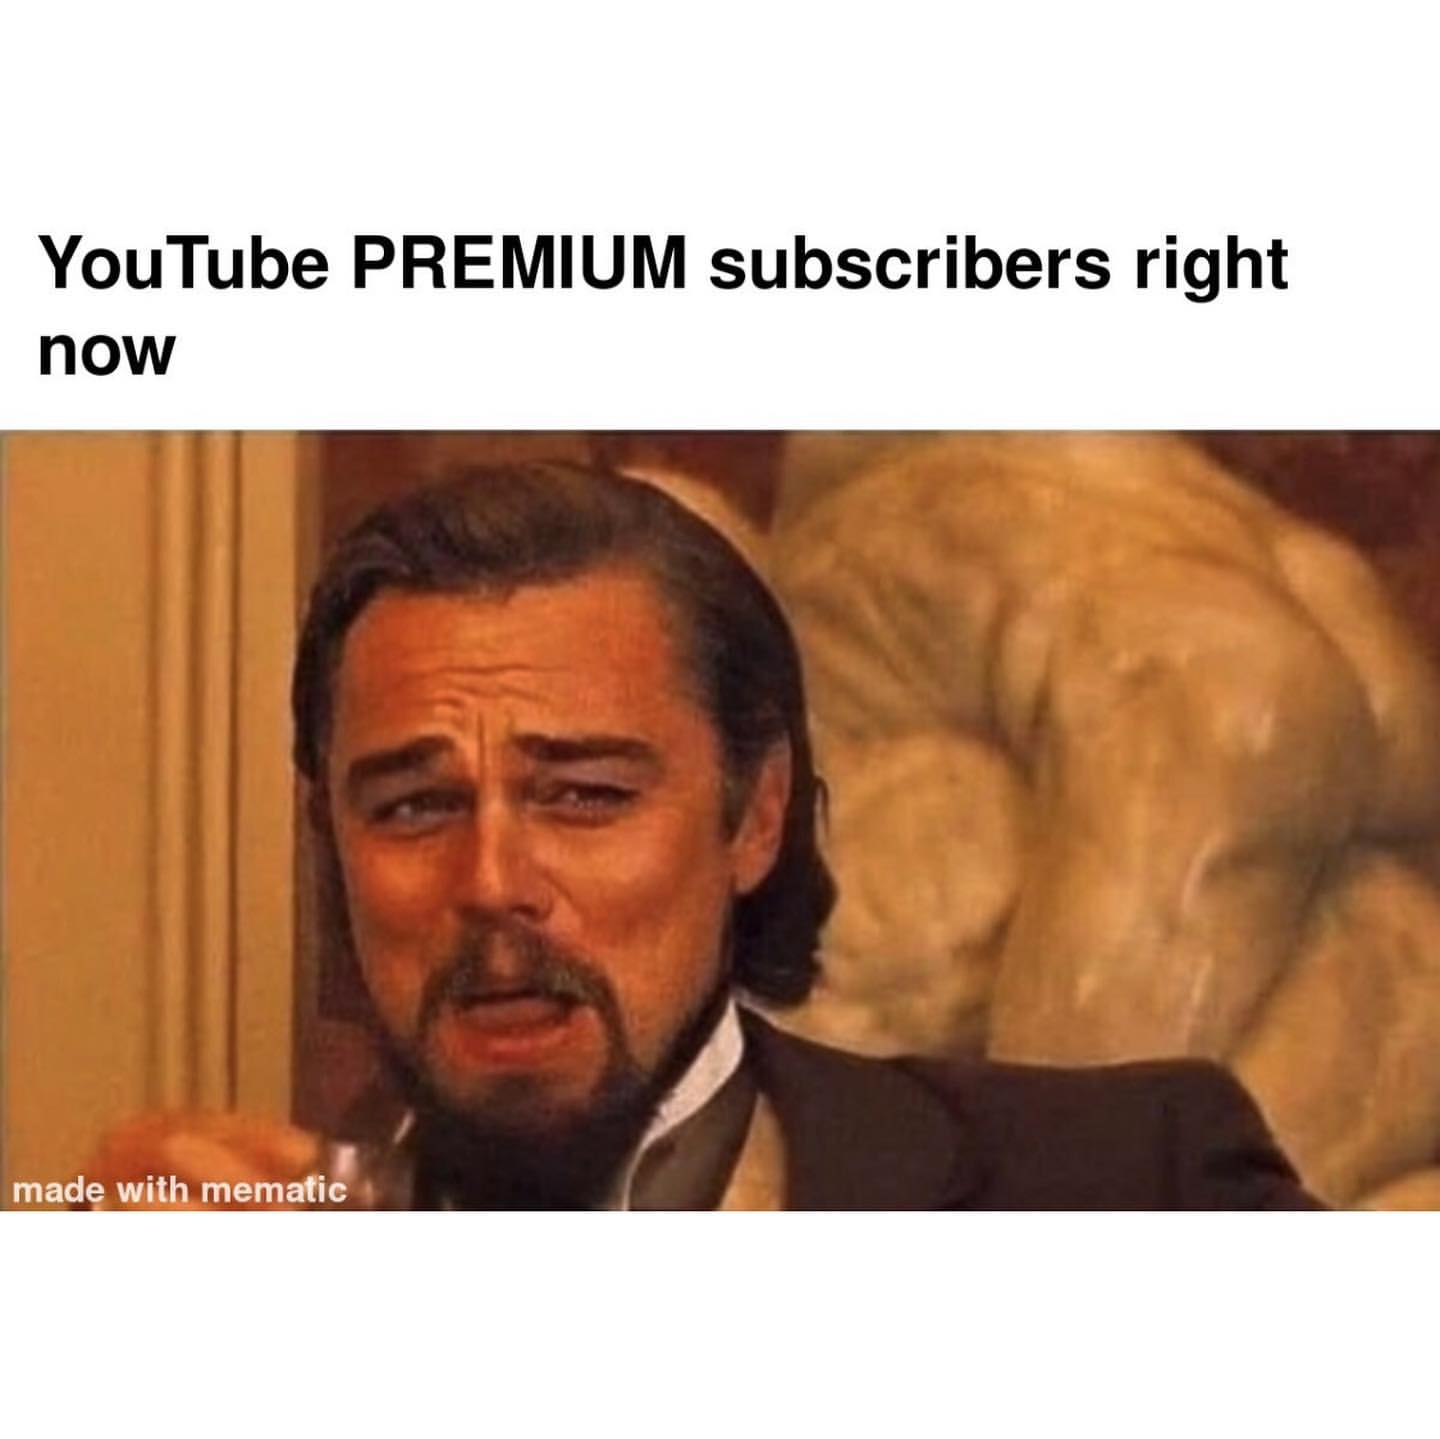 YouTube premium subscribers right now.